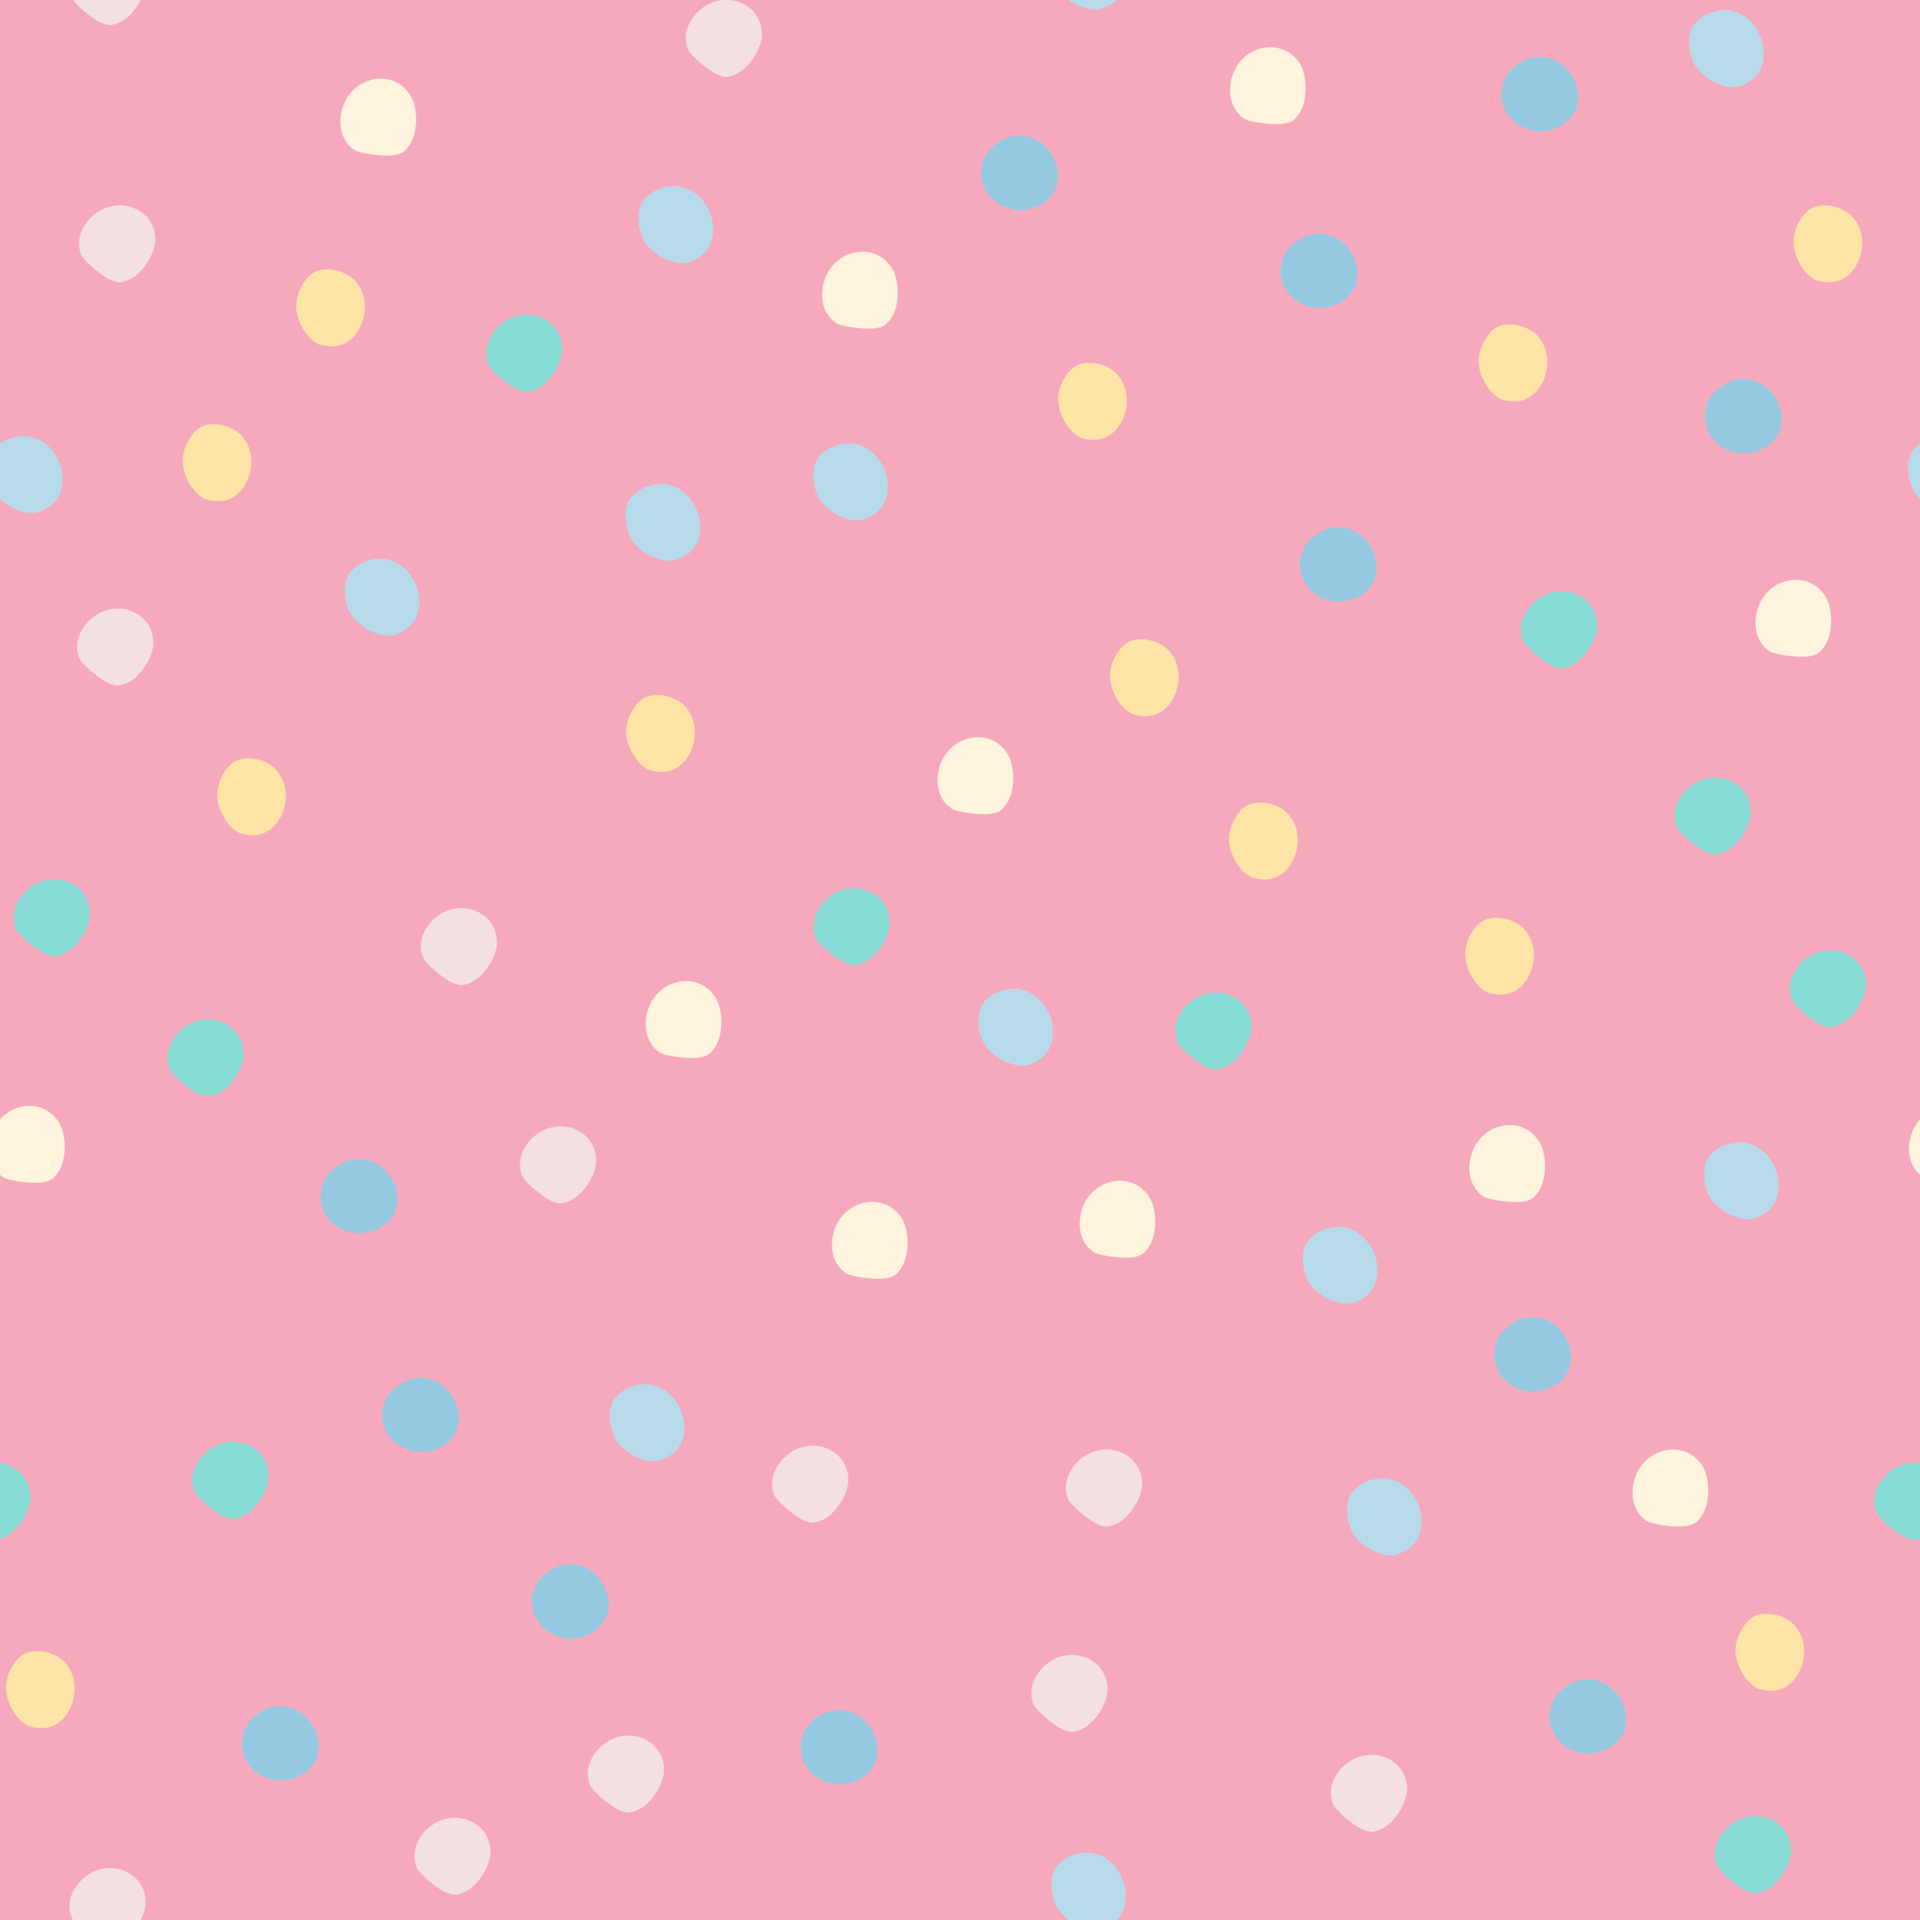 Abstract colored polka dots seamless pattern on pink background. Cute circle shapes wallpaper